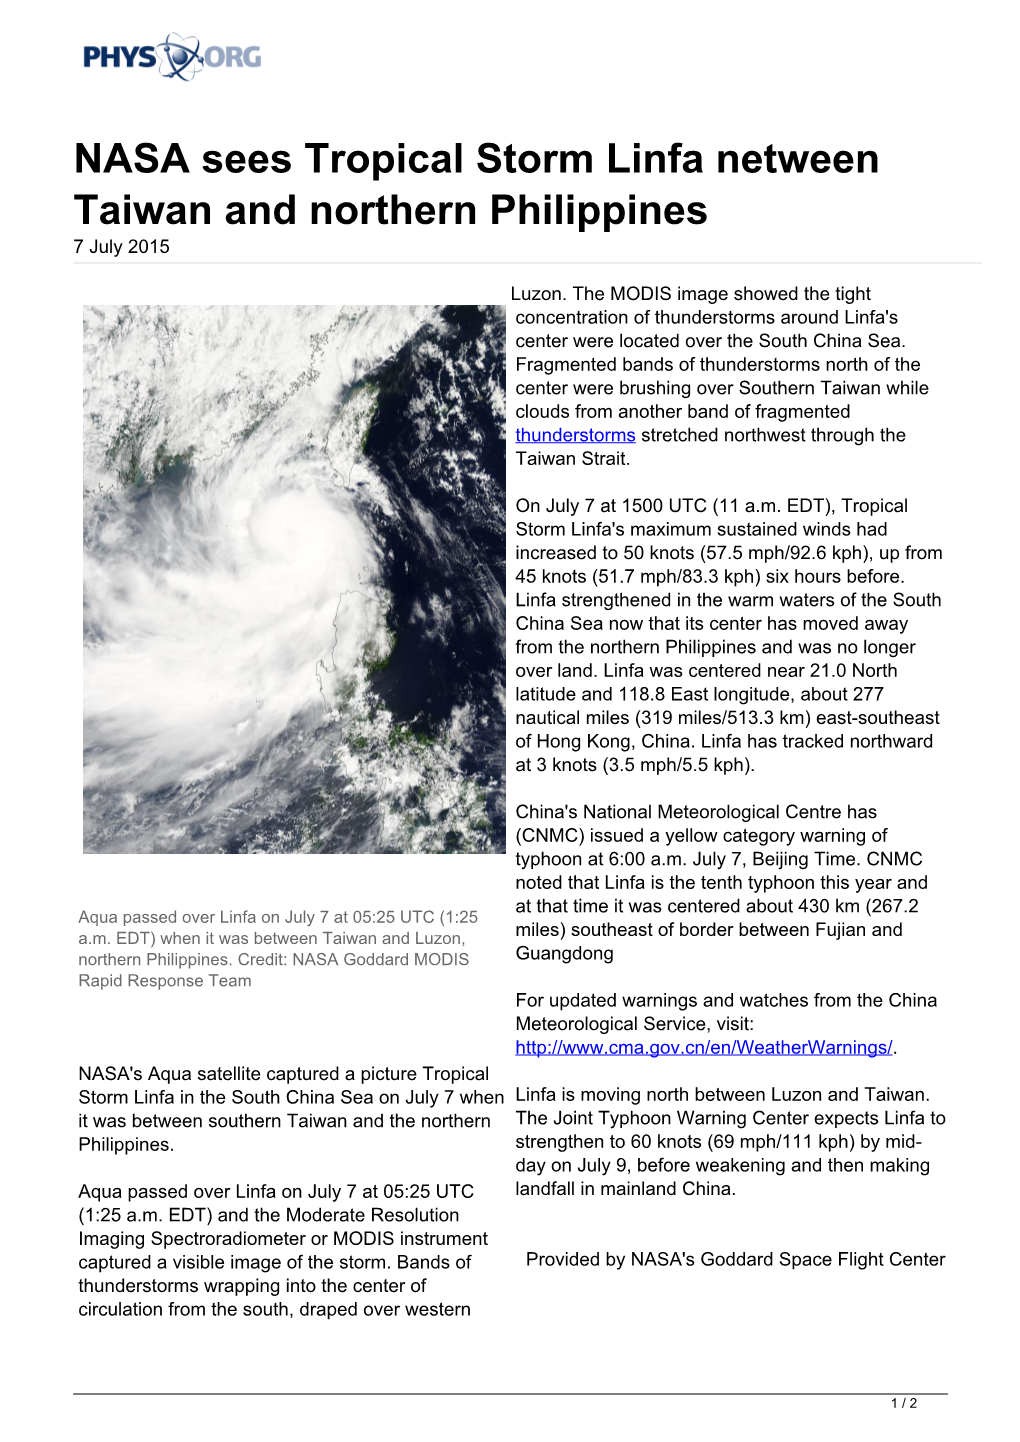 NASA Sees Tropical Storm Linfa Netween Taiwan and Northern Philippines 7 July 2015